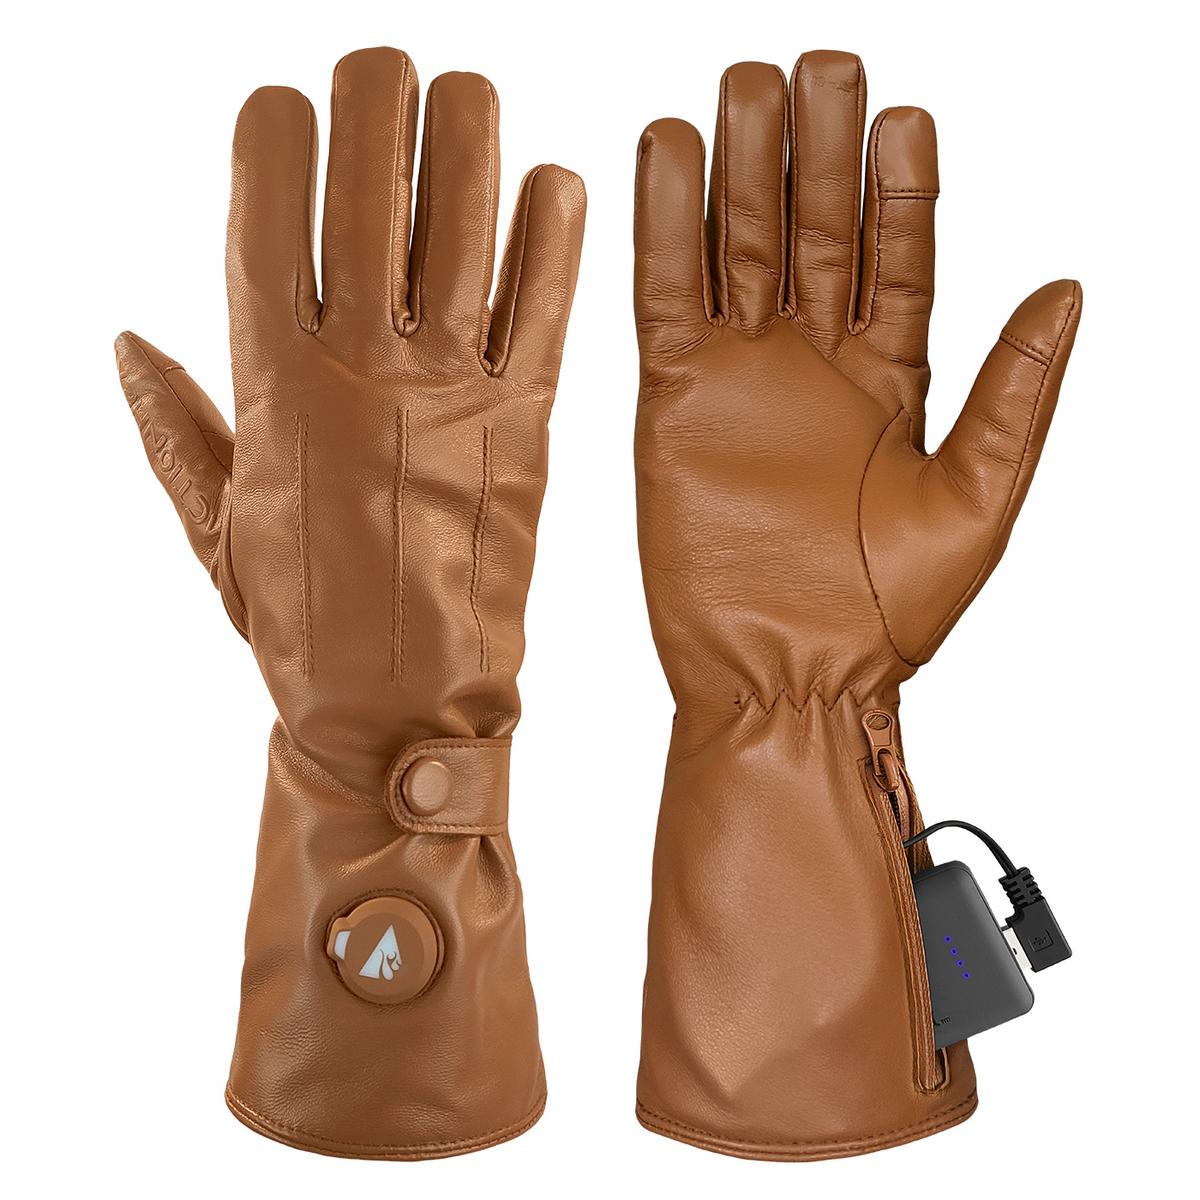 ActionHeat 5V Women's Battery Heated Leather Dress Glove - Heated